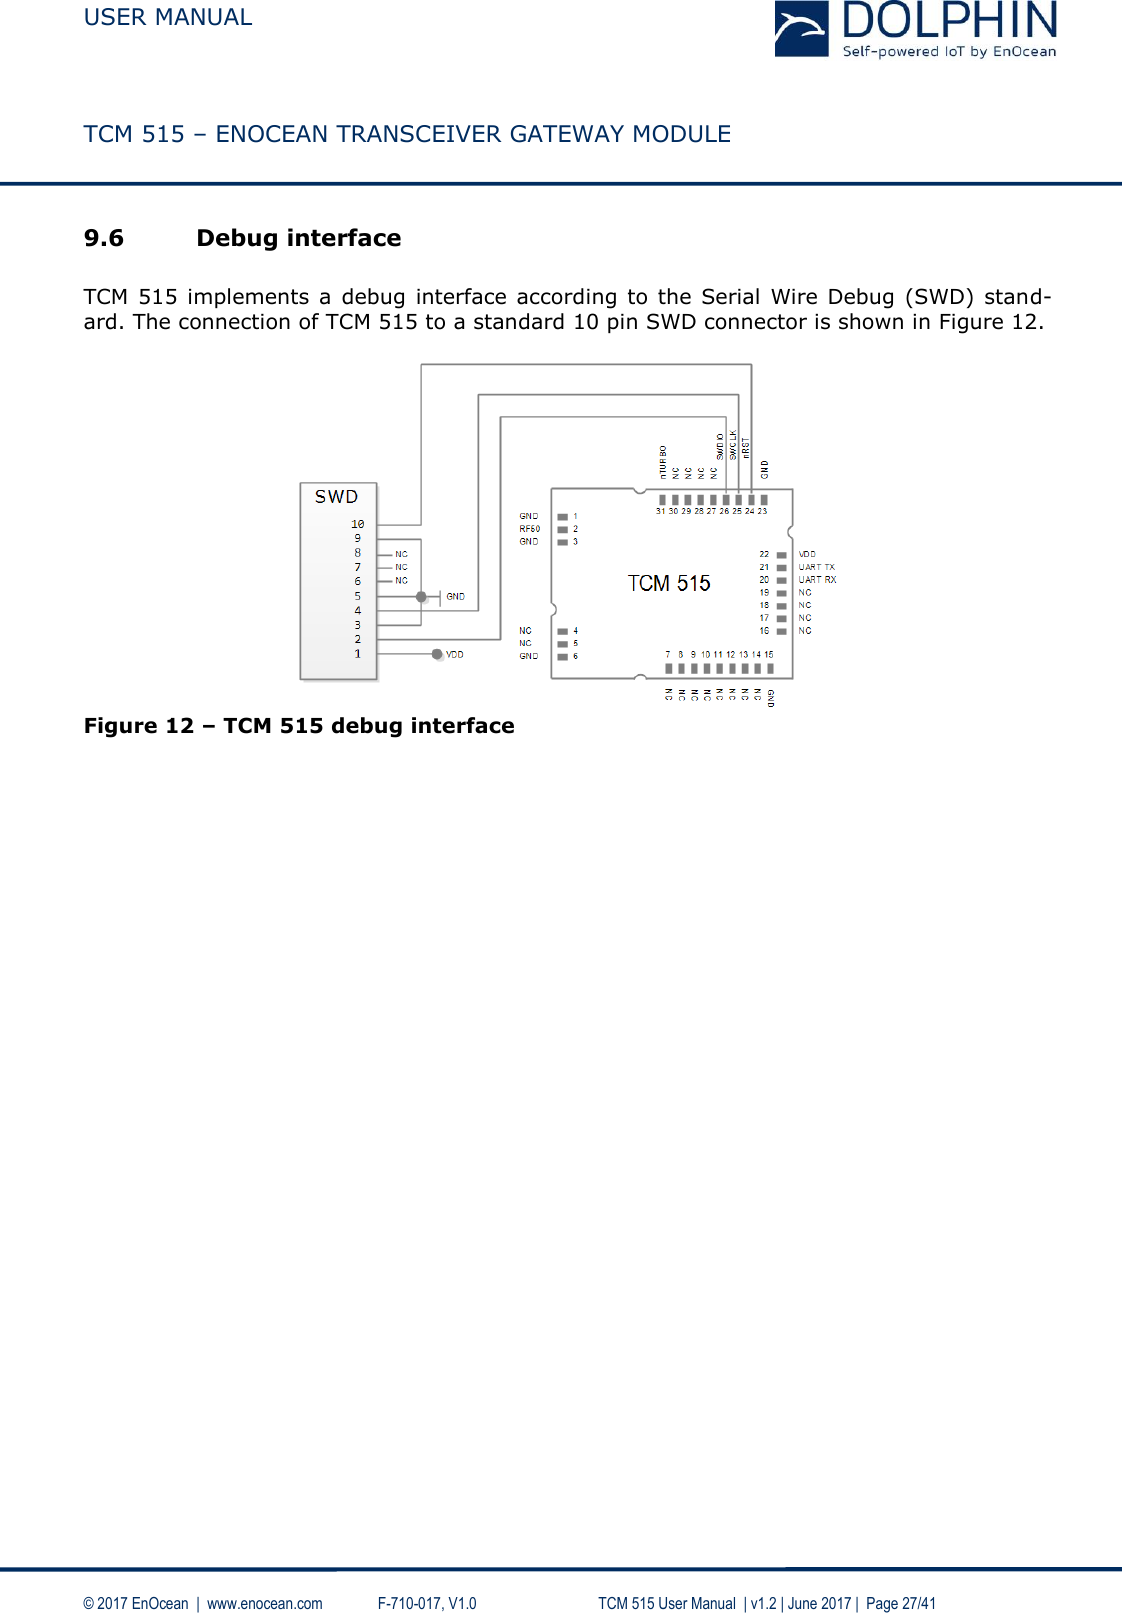  USER MANUAL    TCM 515 – ENOCEAN TRANSCEIVER GATEWAY MODULE  © 2017 EnOcean  |  www.enocean.com   F-710-017, V1.0        TCM 515 User Manual  | v1.2 | June 2017 |  Page 27/41  9.6 Debug interface  TCM 515  implements a  debug  interface according to the Serial Wire Debug (SWD) stand-ard. The connection of TCM 515 to a standard 10 pin SWD connector is shown in Figure 12.   Figure 12 – TCM 515 debug interface      